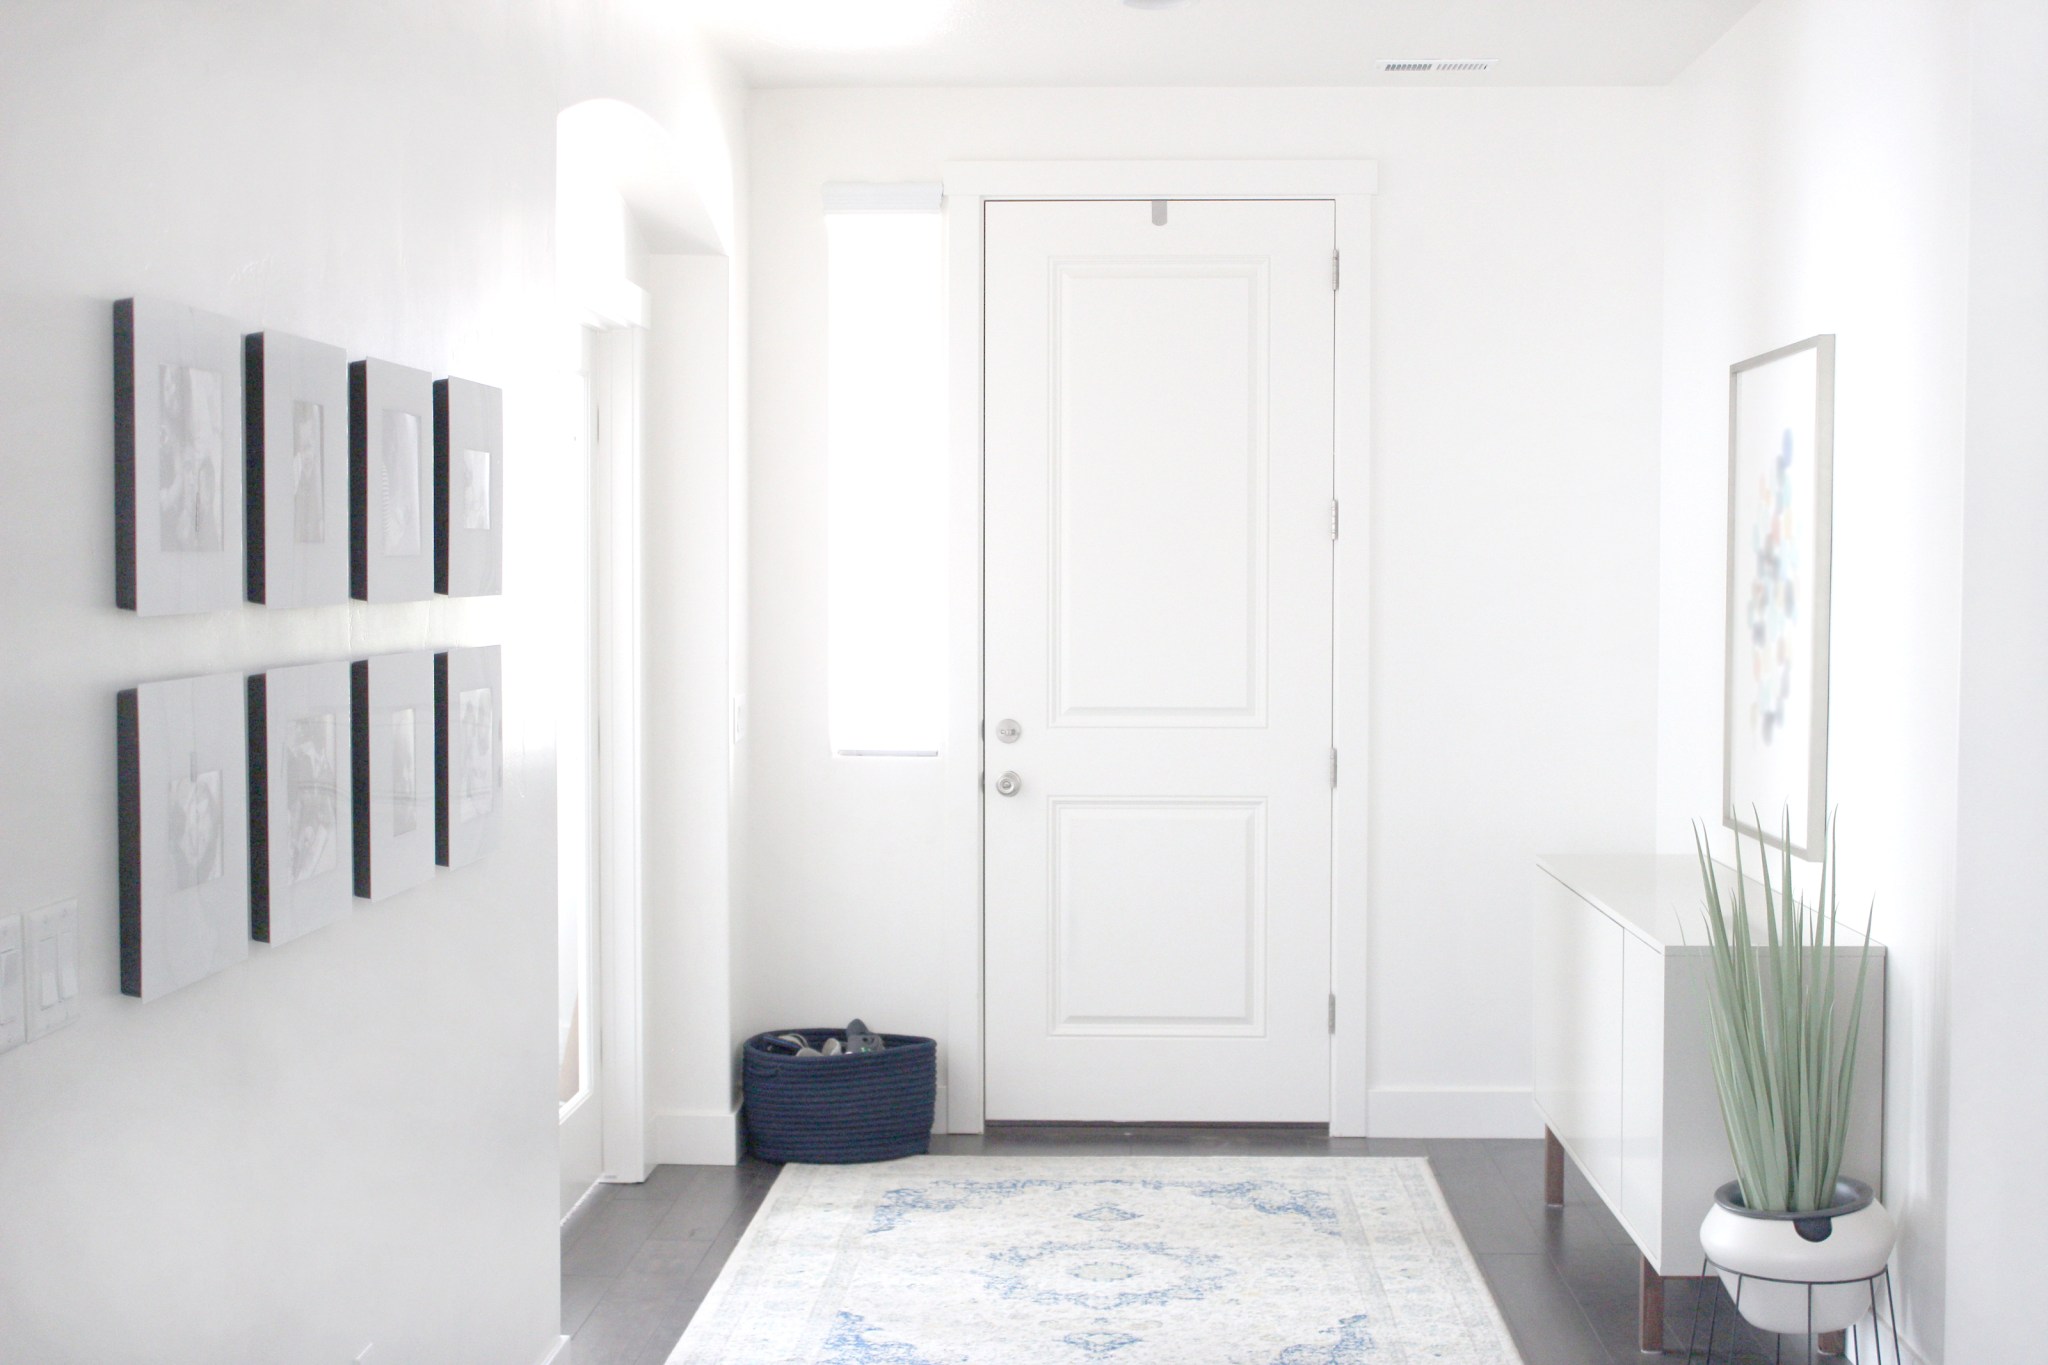 New Mudroom Rug: How to Pick the Perfect Rug  Little House of Four -  Creating a beautiful home, one thrifty project at a time.